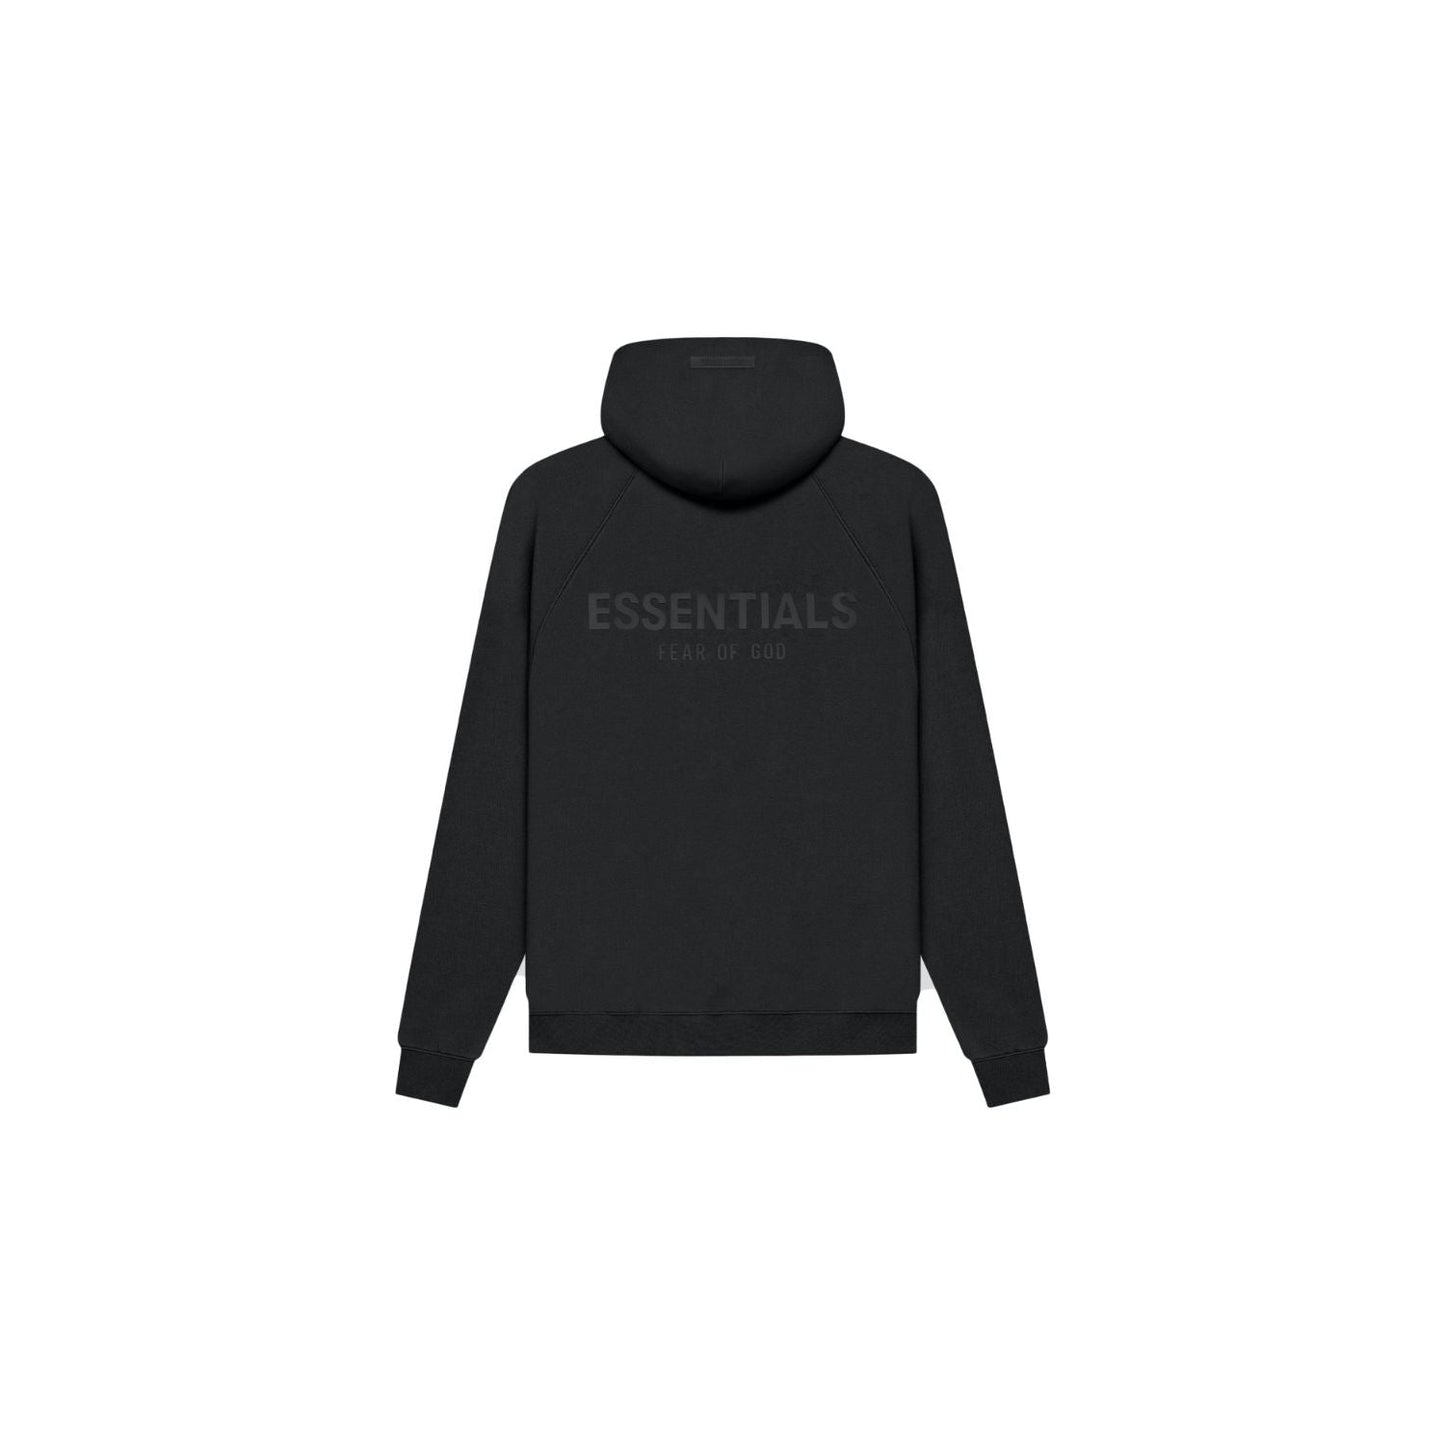 FEAR OF GOD ESSENTIALS Pull-Over Hoodie (SS21) Black/Stretch Limo BACK LOGO